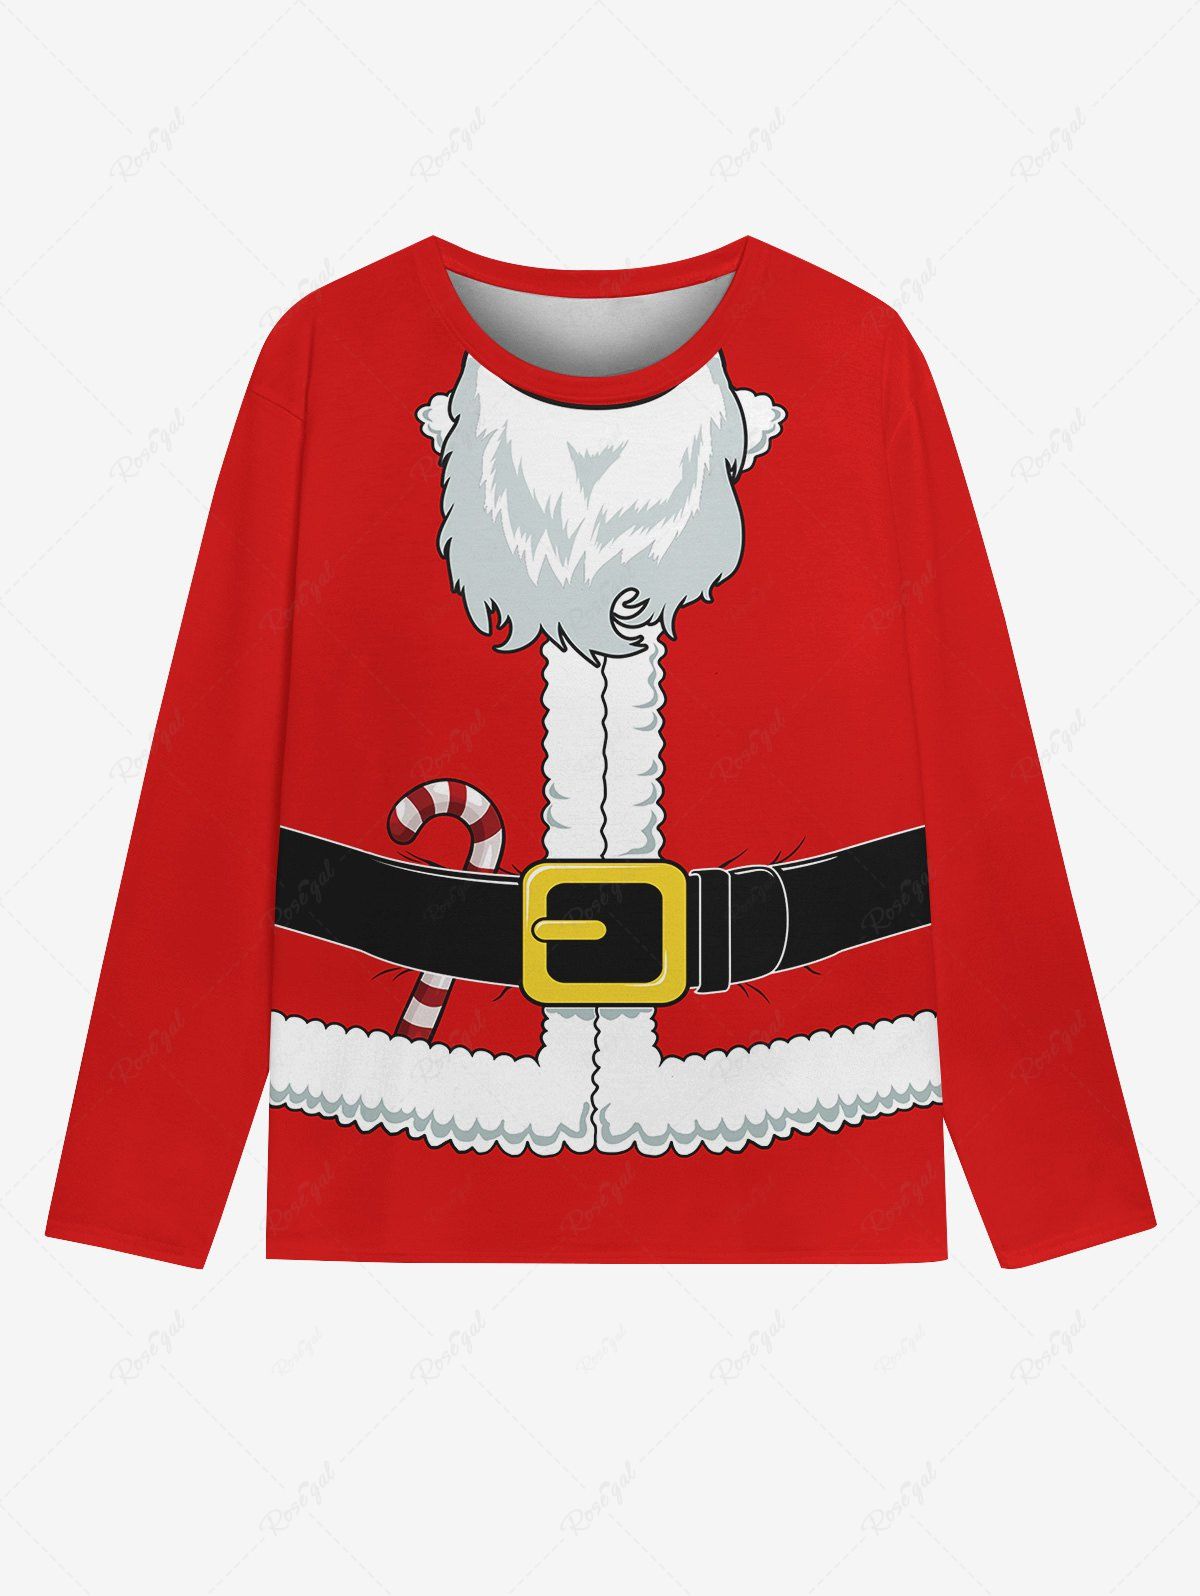 Outfit Gothic Christmas Santa Clause Beard Candy Belt 3D Print T-shirt For Men  